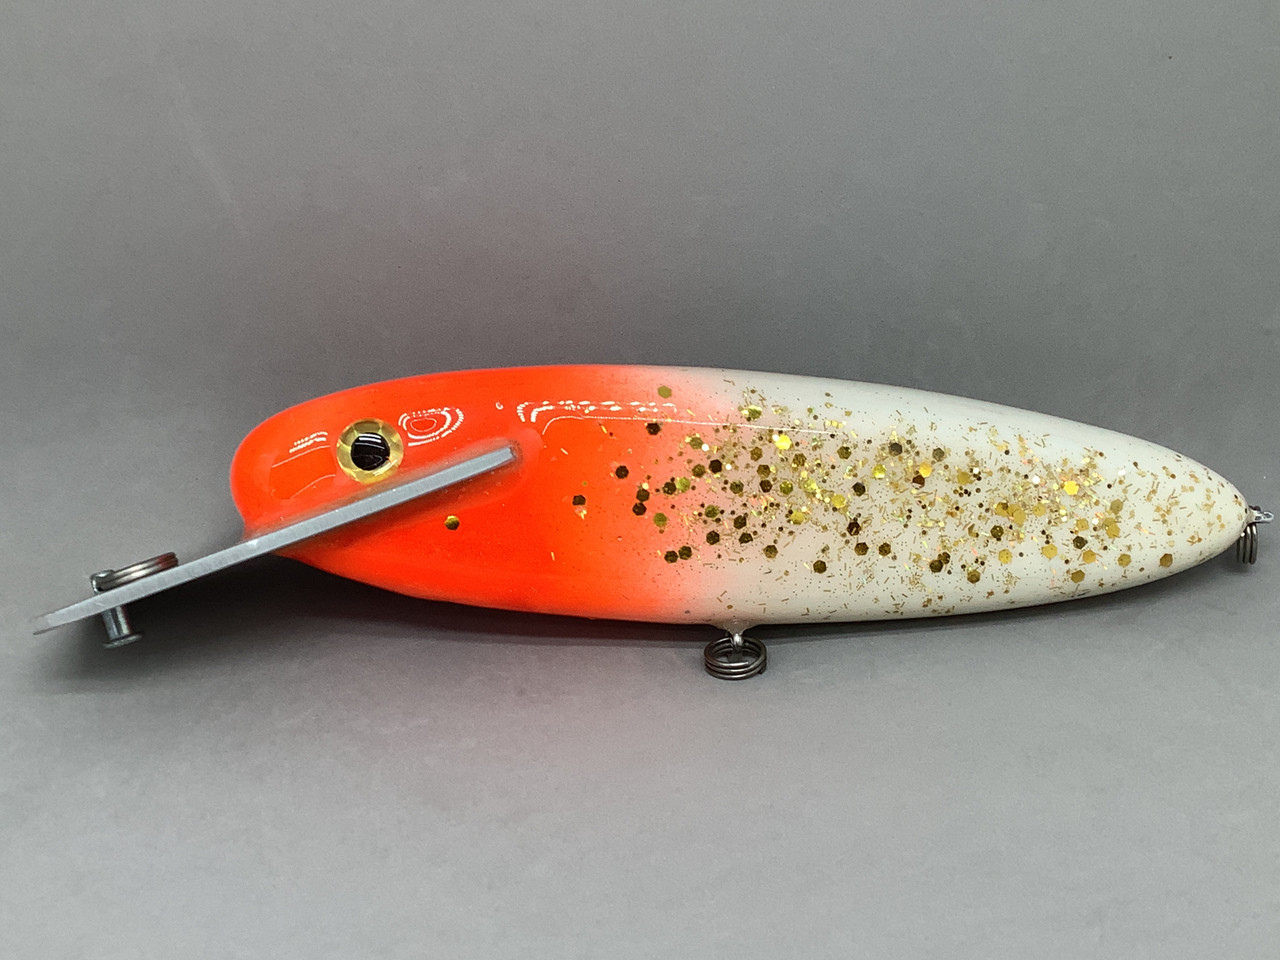 Fishing Lures for sale in Mankato, Minnesota